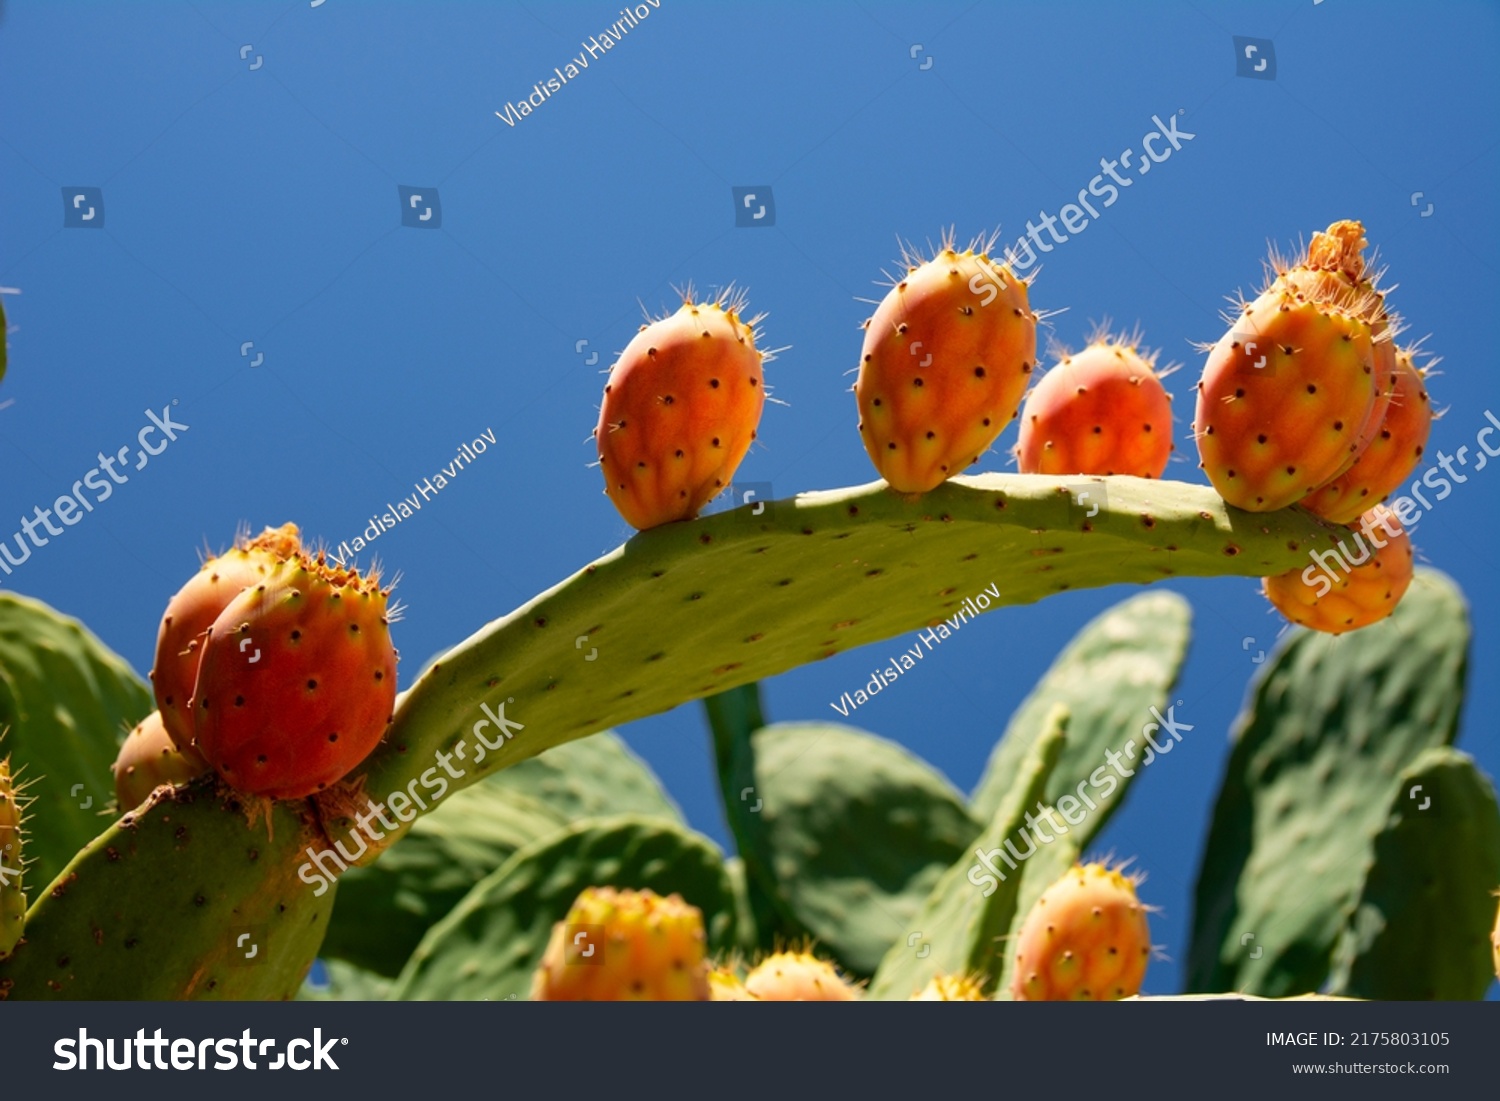 Opuntia Ficus Indica, the prickly pear. Ripe orange and yellow fruits of cactus and green thick leaves with needles. A species of cactus with edible fruits. Barbary fig fruits, cactus spines. #2175803105